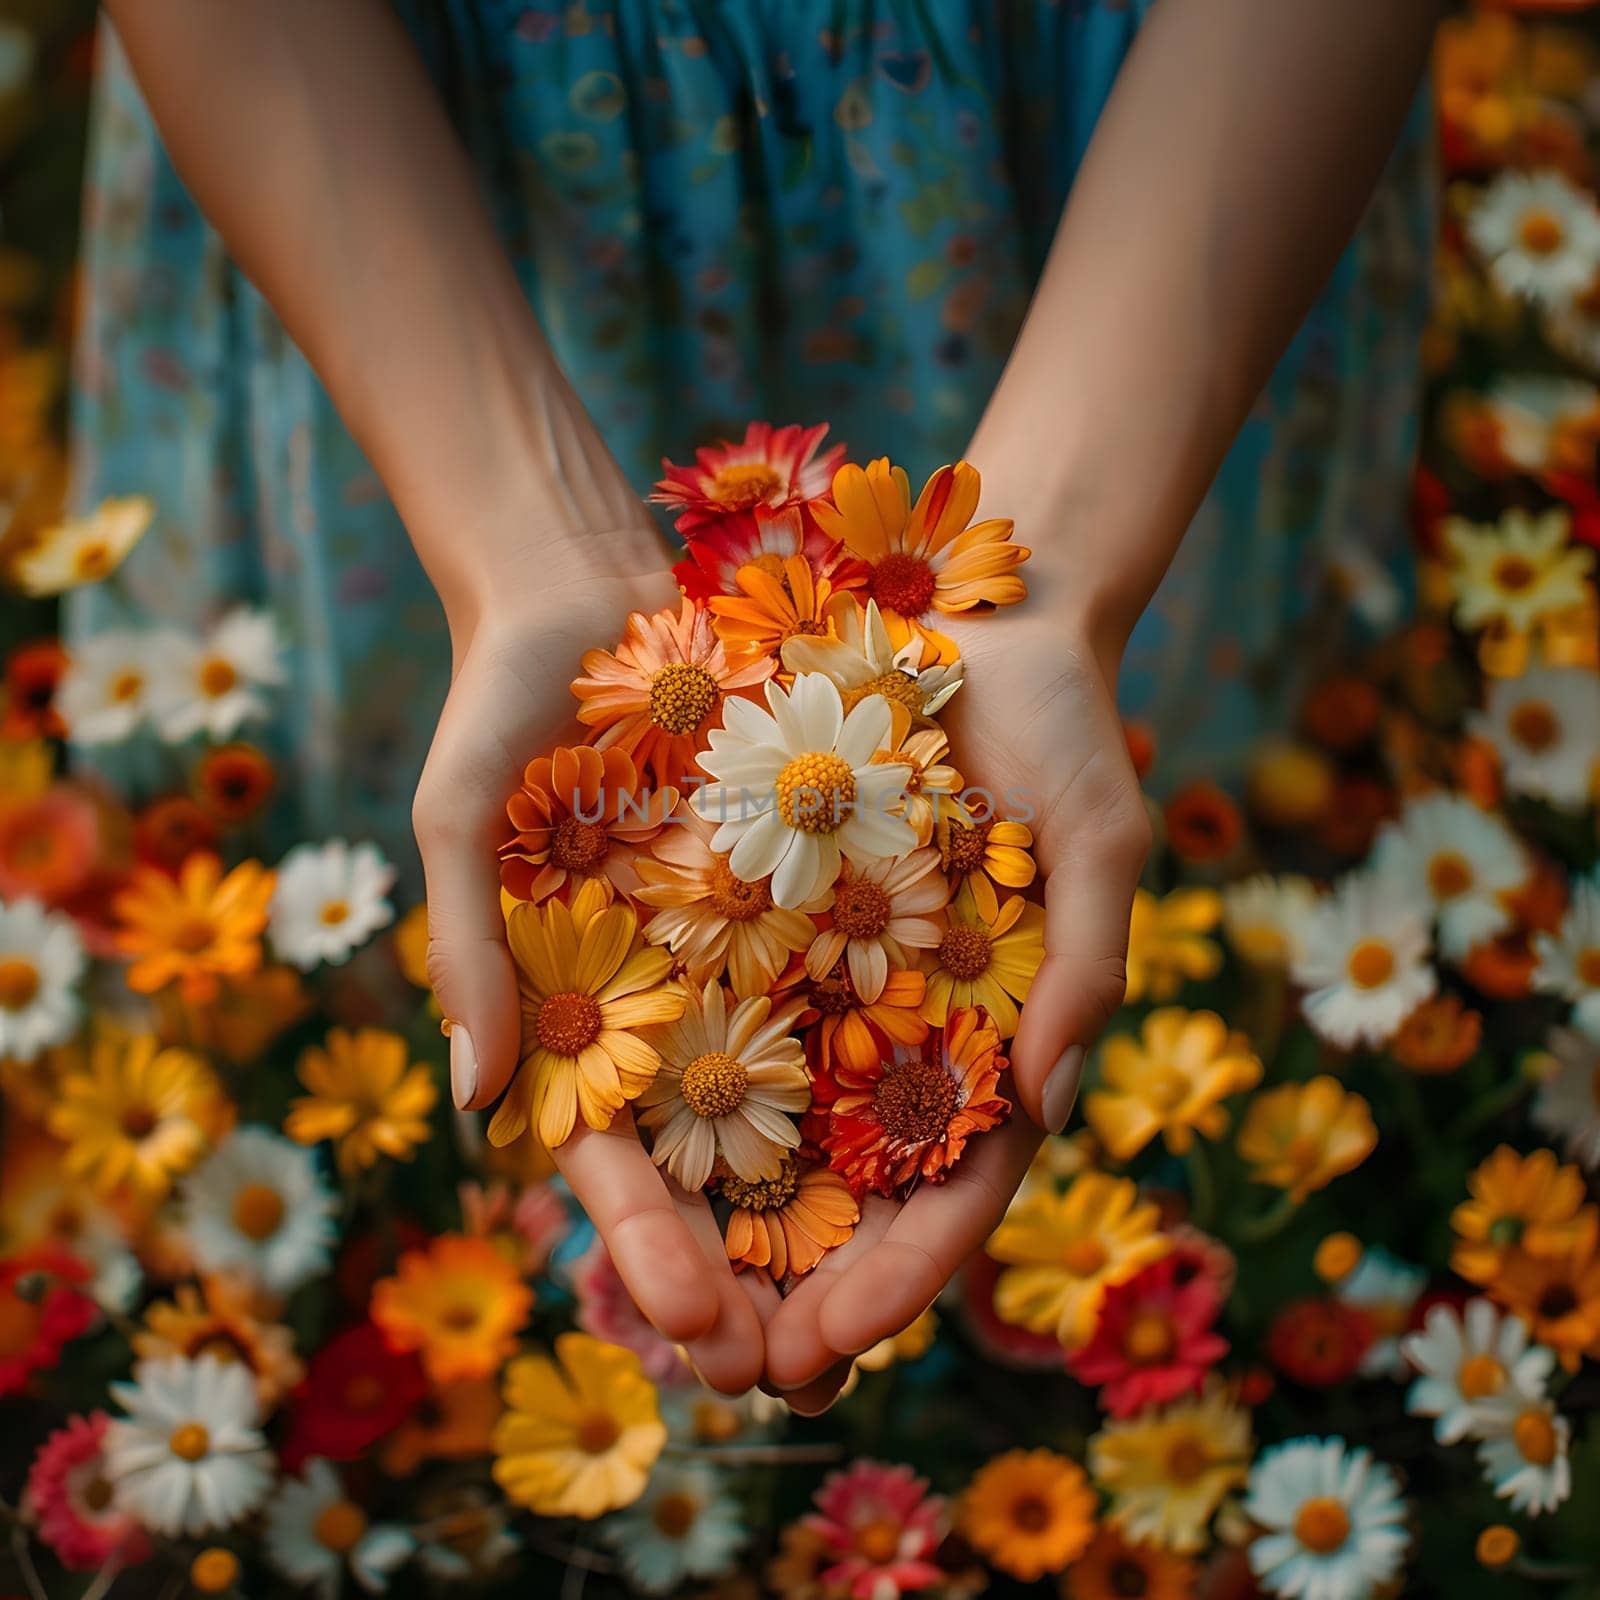 A woman happily holds a bouquet of orange flowers in her hands by Nadtochiy